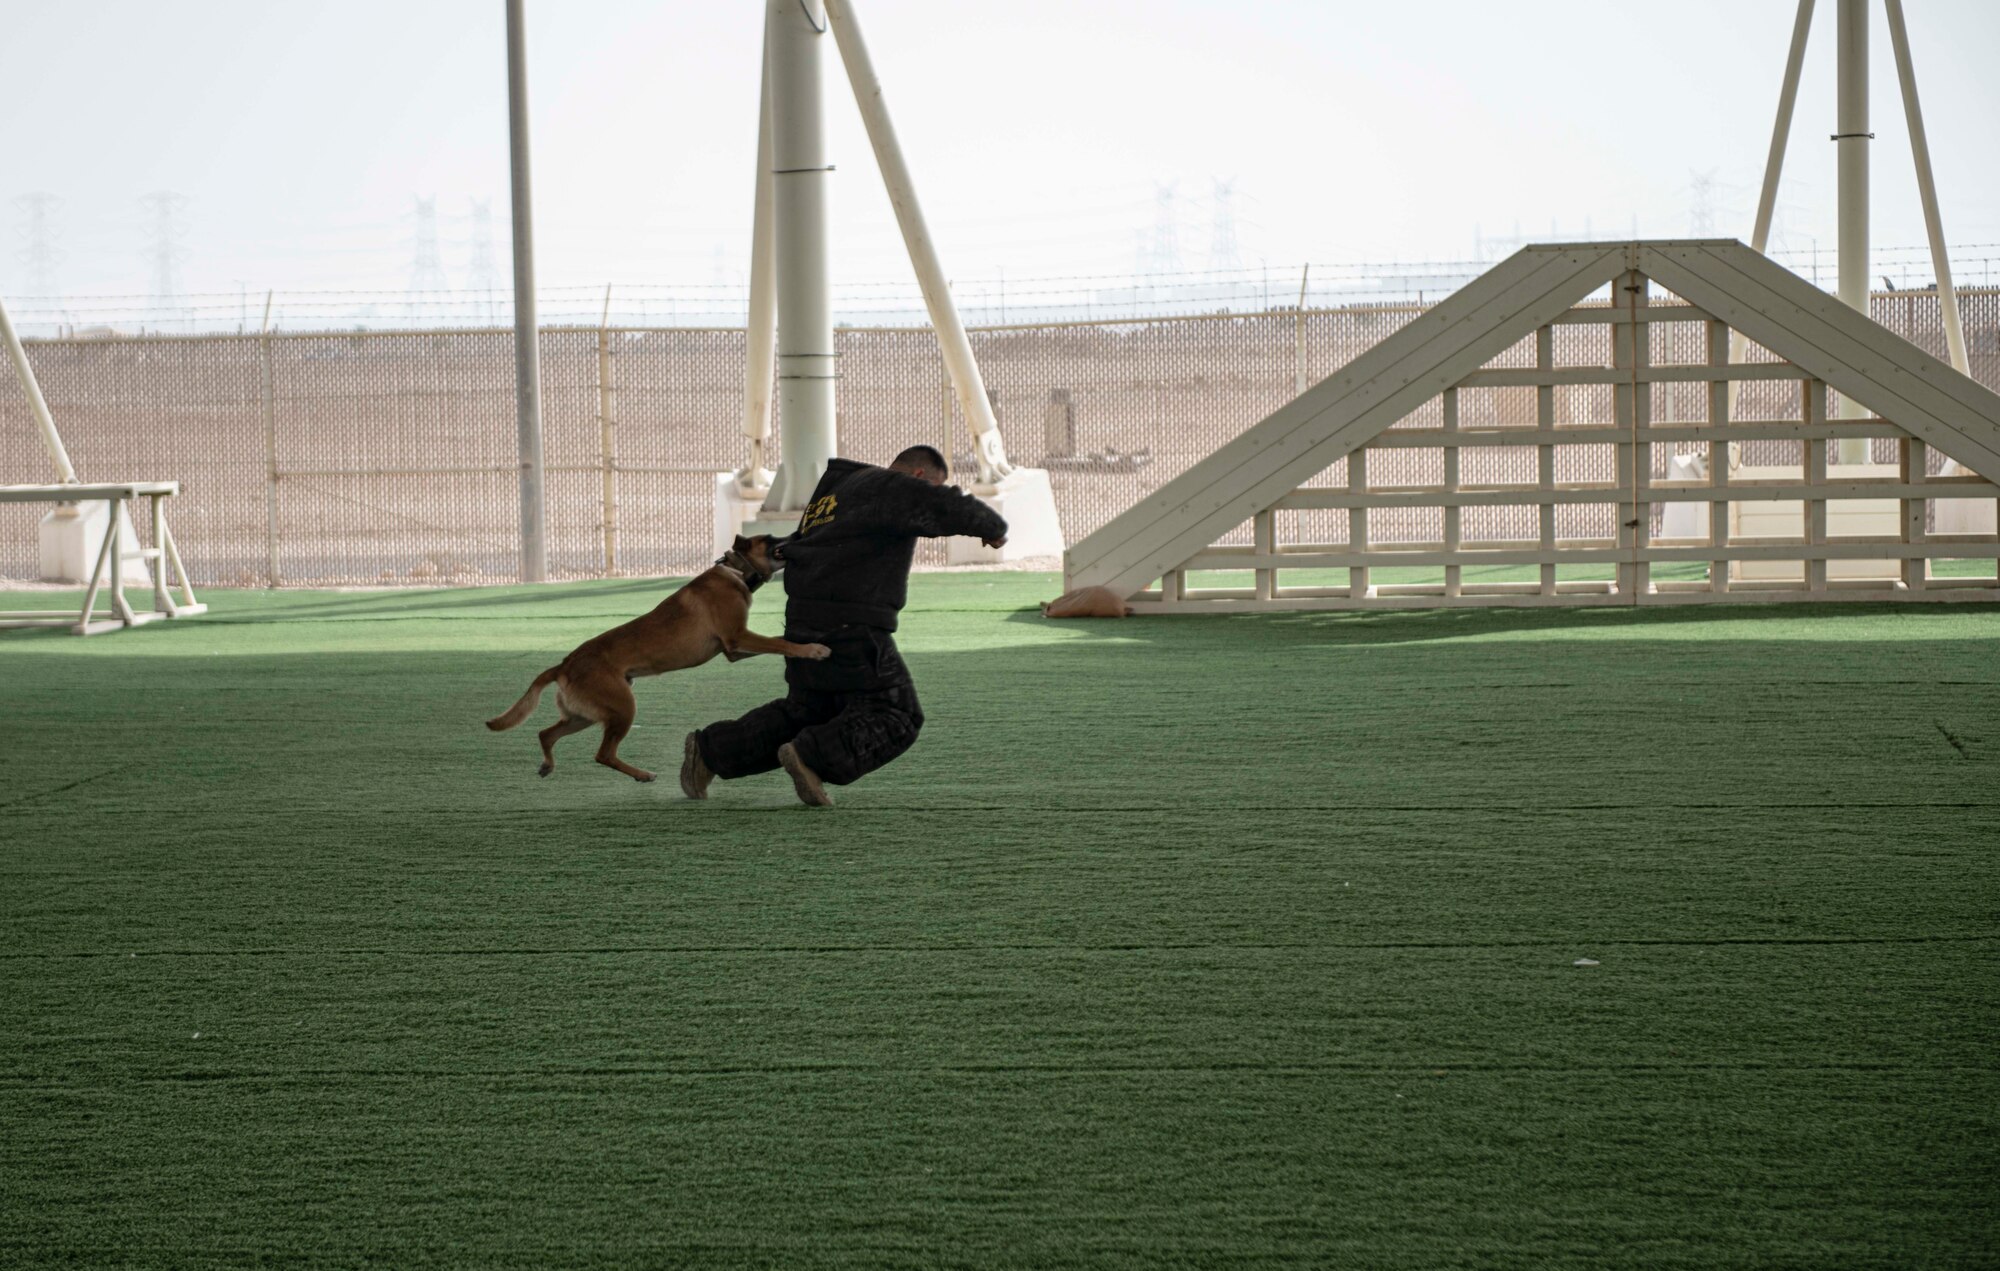 Bico, a military work dog with the 379th Expeditionary Security Forces Squadron, takes down U.S. Air Force Chief Master Sgt. Joseph Arce, 379th Air Expeditionary Wing command chief, during a K-9 demonstration Sept. 12, 2022 at Al Udeid Air Base, Qatar. Arce took an active role in the demonstration by simulating the actions of an assailant. (U.S. Air National Guard photo by Master Sgt. Michael J. Kelly)